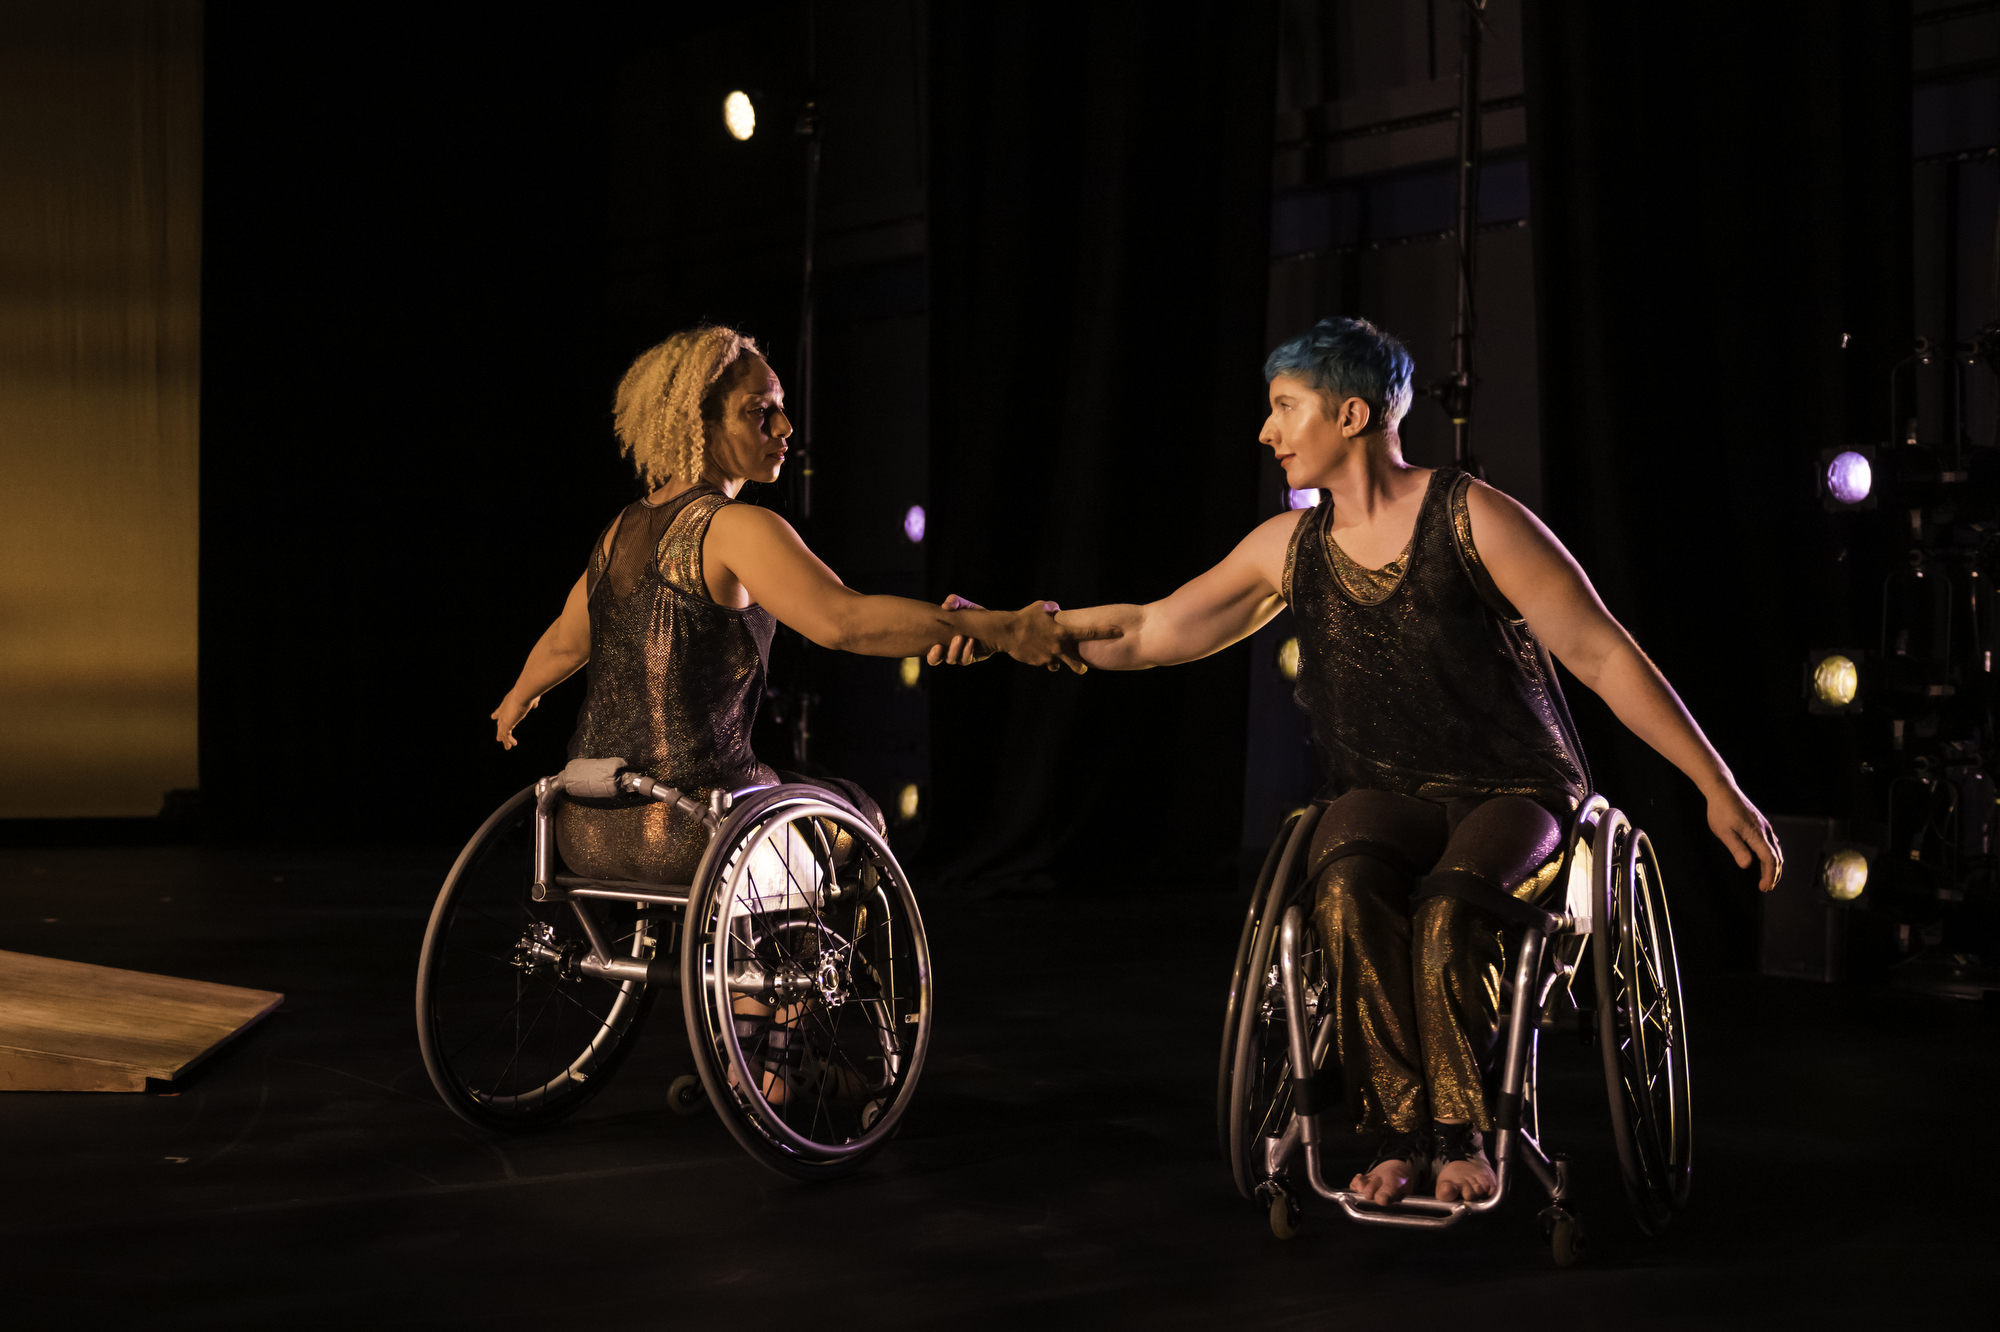 With stage lights in the background, dancers Alice Sheppard and Laurel Lawson look at each other with their arms interlaced, their bodies an arm length apart, yet facing opposite directions. Laurel, a white woman with cropped blue hair, faces toward the camera, with Alice: a light-skinned multiracial Black woman, faces away. They are dressed in shimmering autumnal tones.